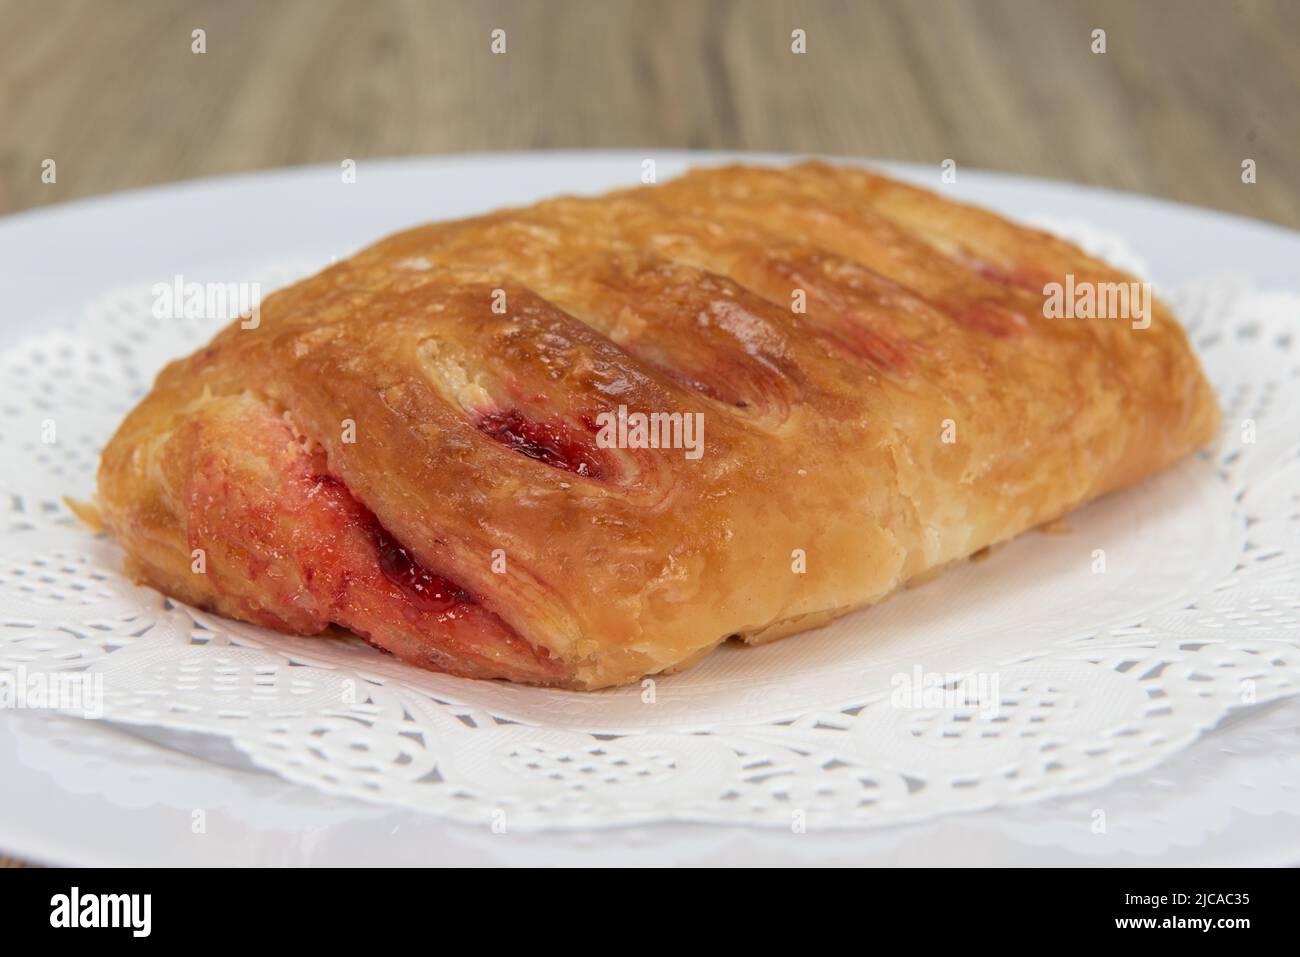 Tempting fresh from the oven chocolate croissant from the bakery served on a plate. Stock Photo